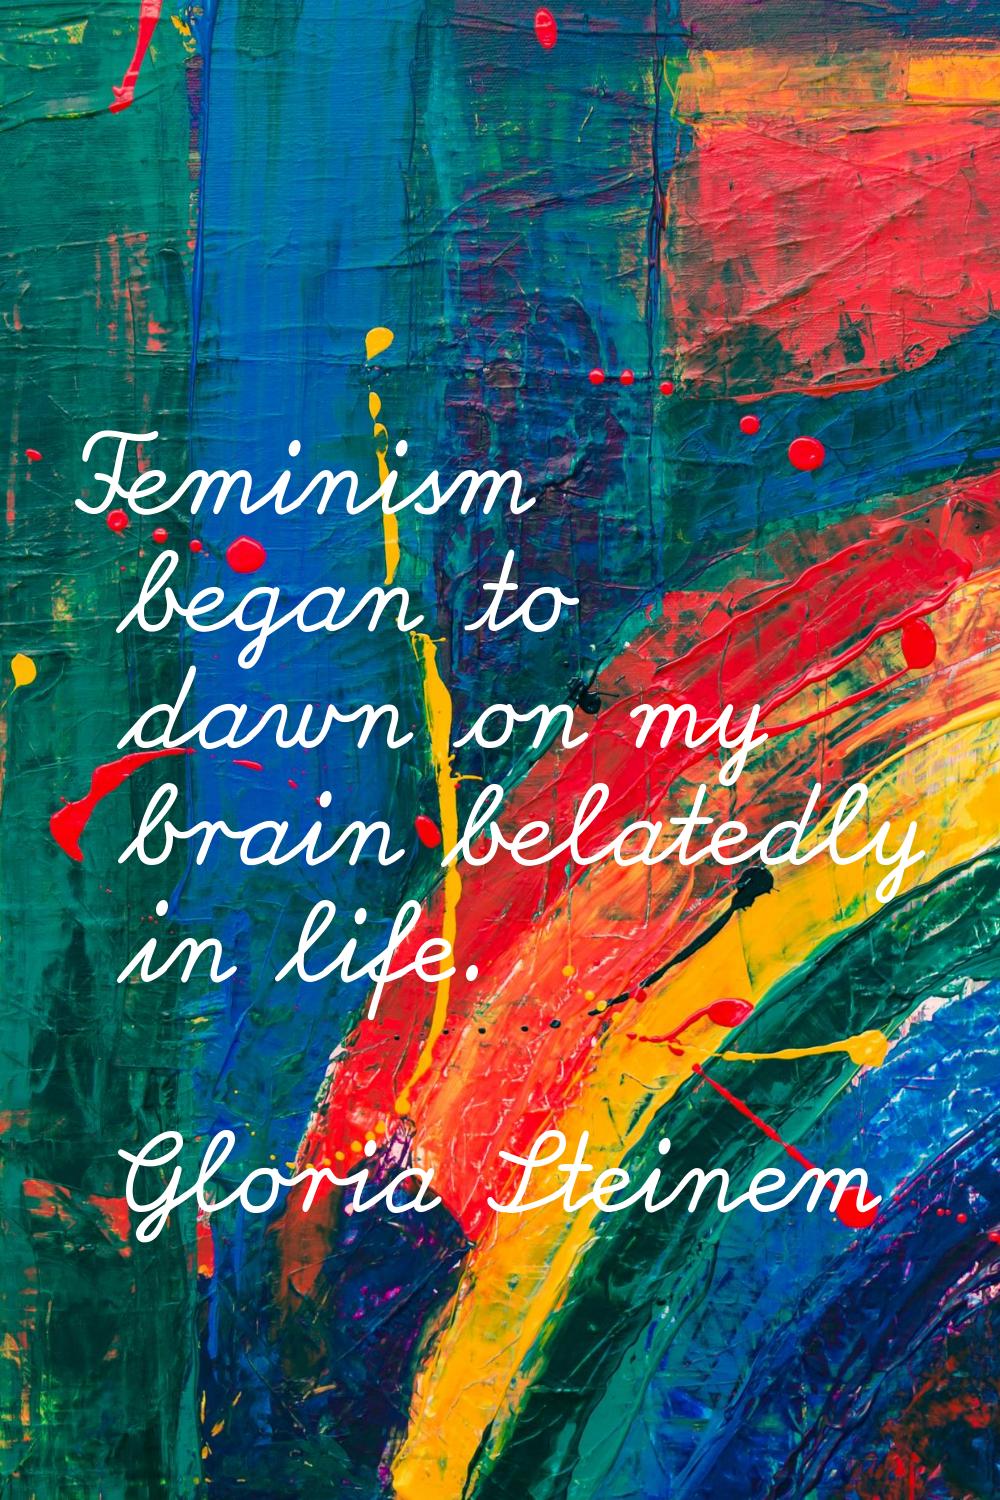 Feminism began to dawn on my brain belatedly in life.